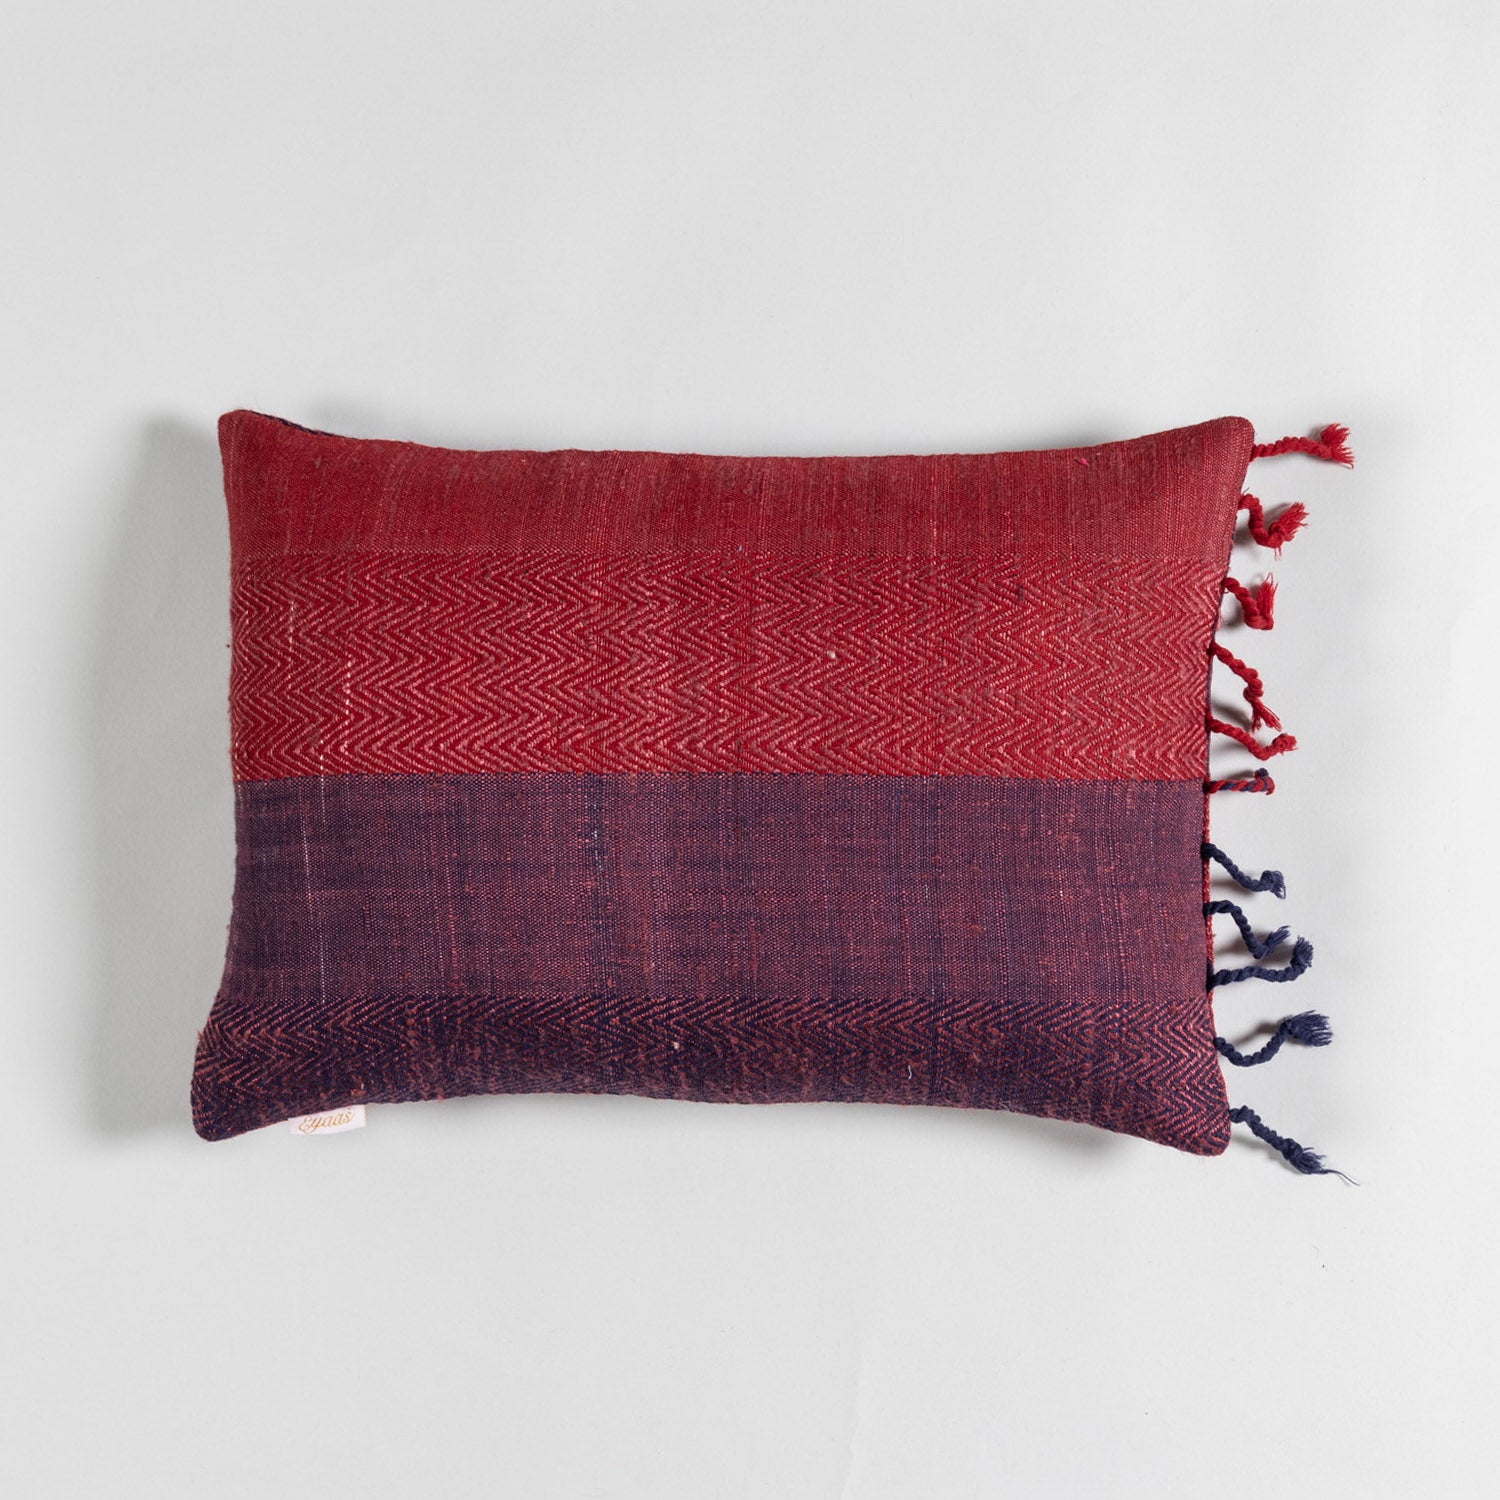 Handwoven Upcycled Red & Blue Wool & Oak Silk Cushion Cover - 12x18